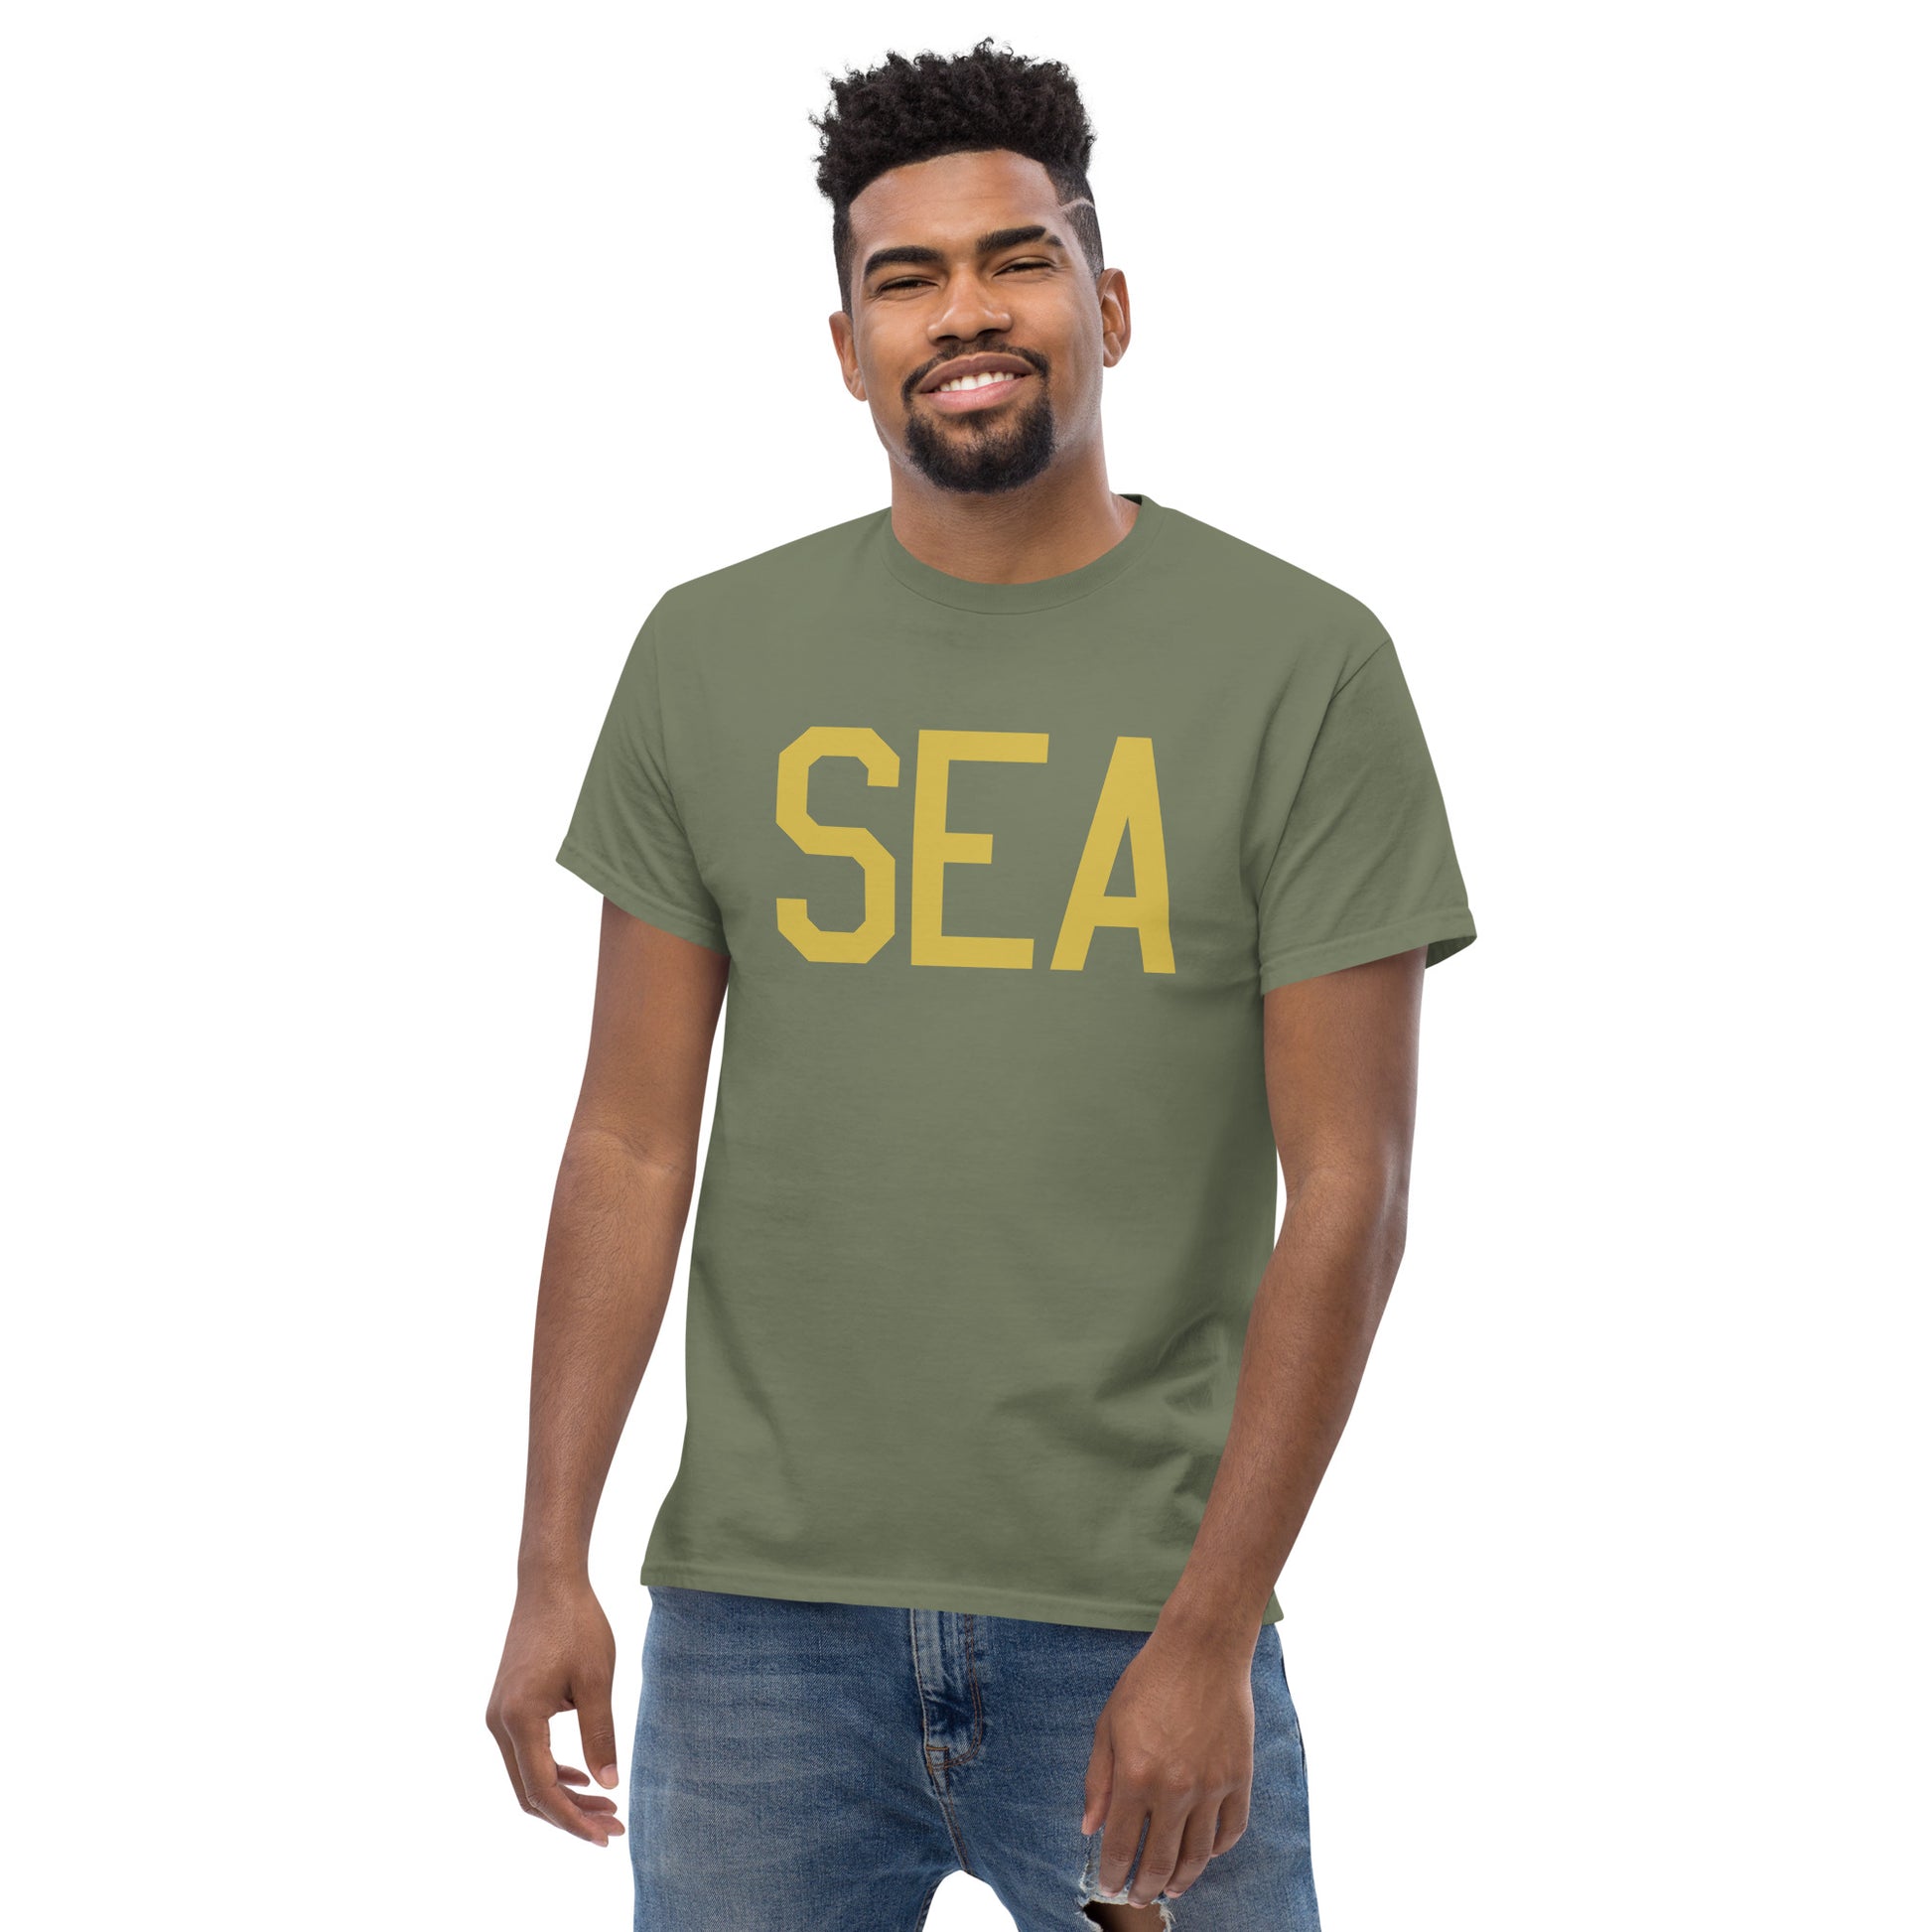 Aviation Enthusiast Men's Tee - Old Gold Graphic • SEA Seattle • YHM Designs - Image 06